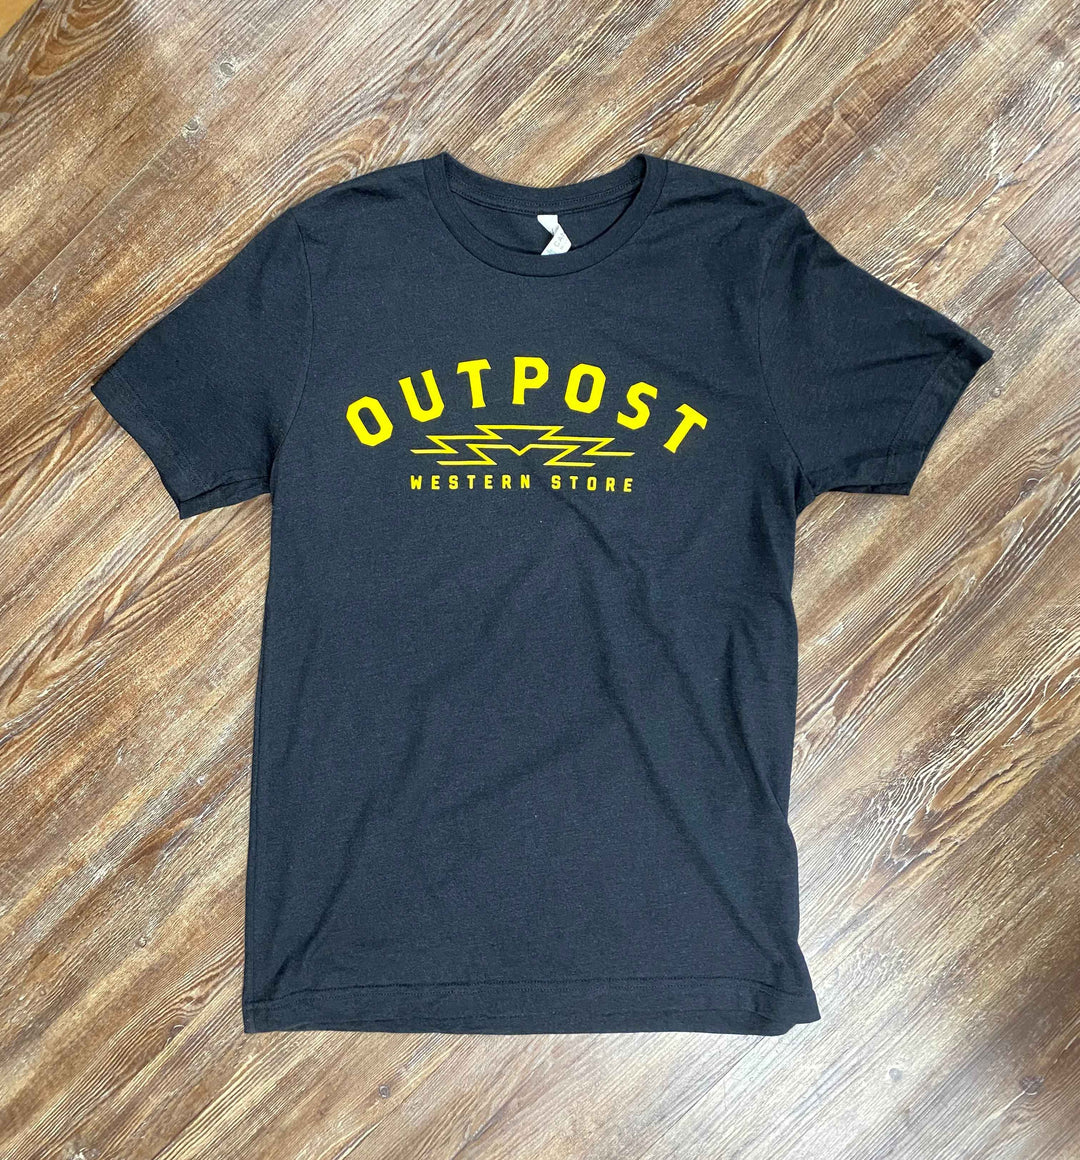 Outpost Sunrise Logo Tee, black with yellow screen print